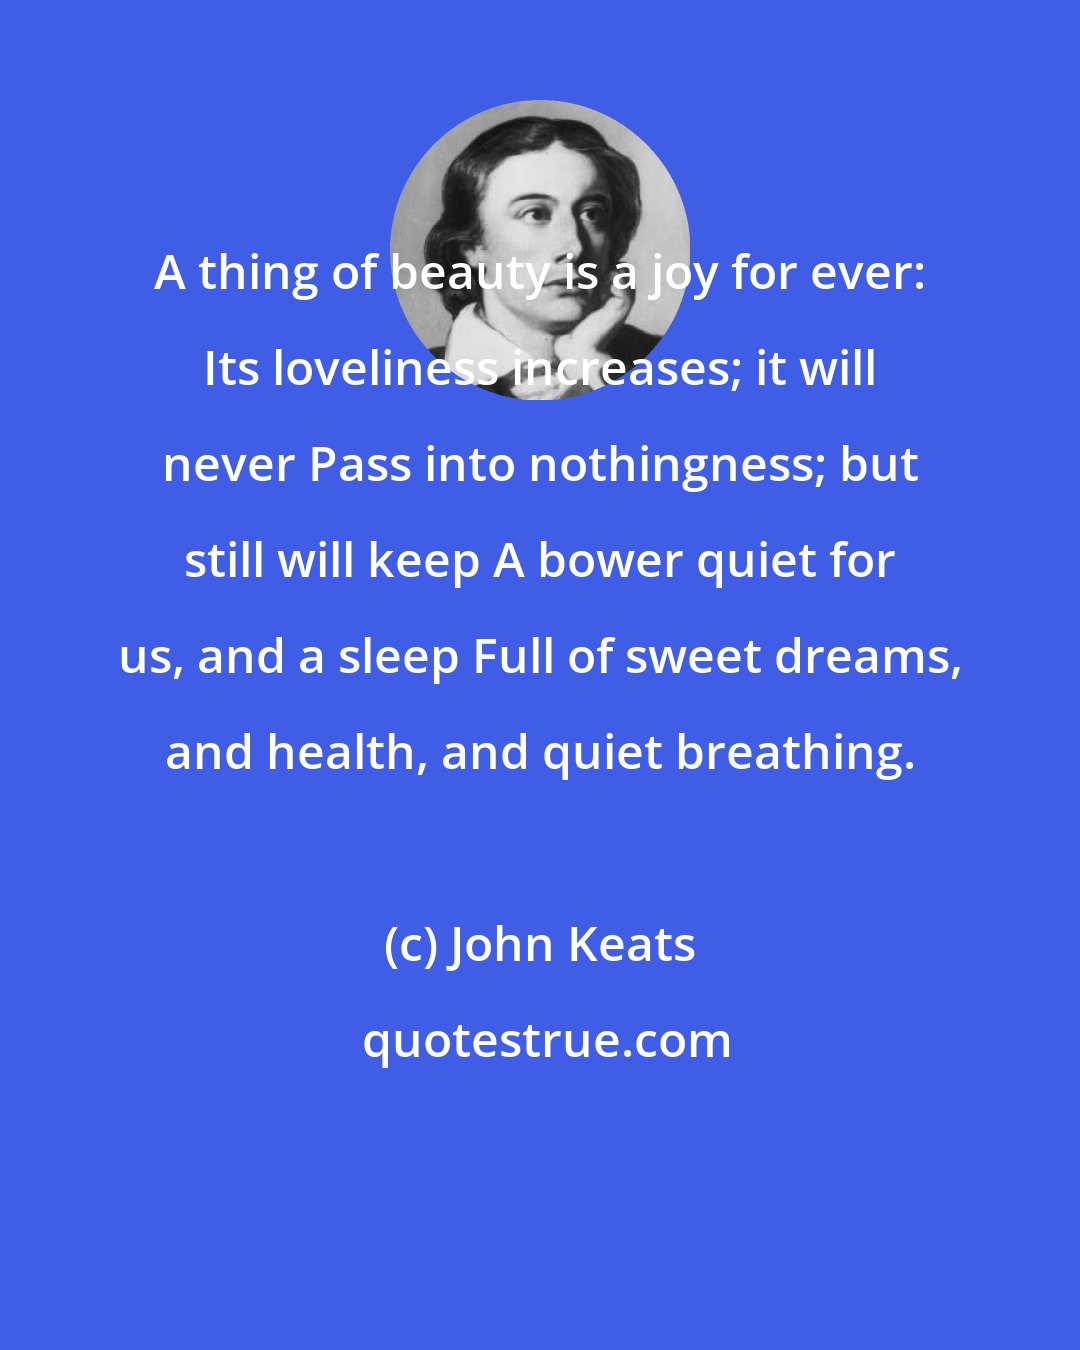 John Keats: A thing of beauty is a joy for ever: Its loveliness increases; it will never Pass into nothingness; but still will keep A bower quiet for us, and a sleep Full of sweet dreams, and health, and quiet breathing.